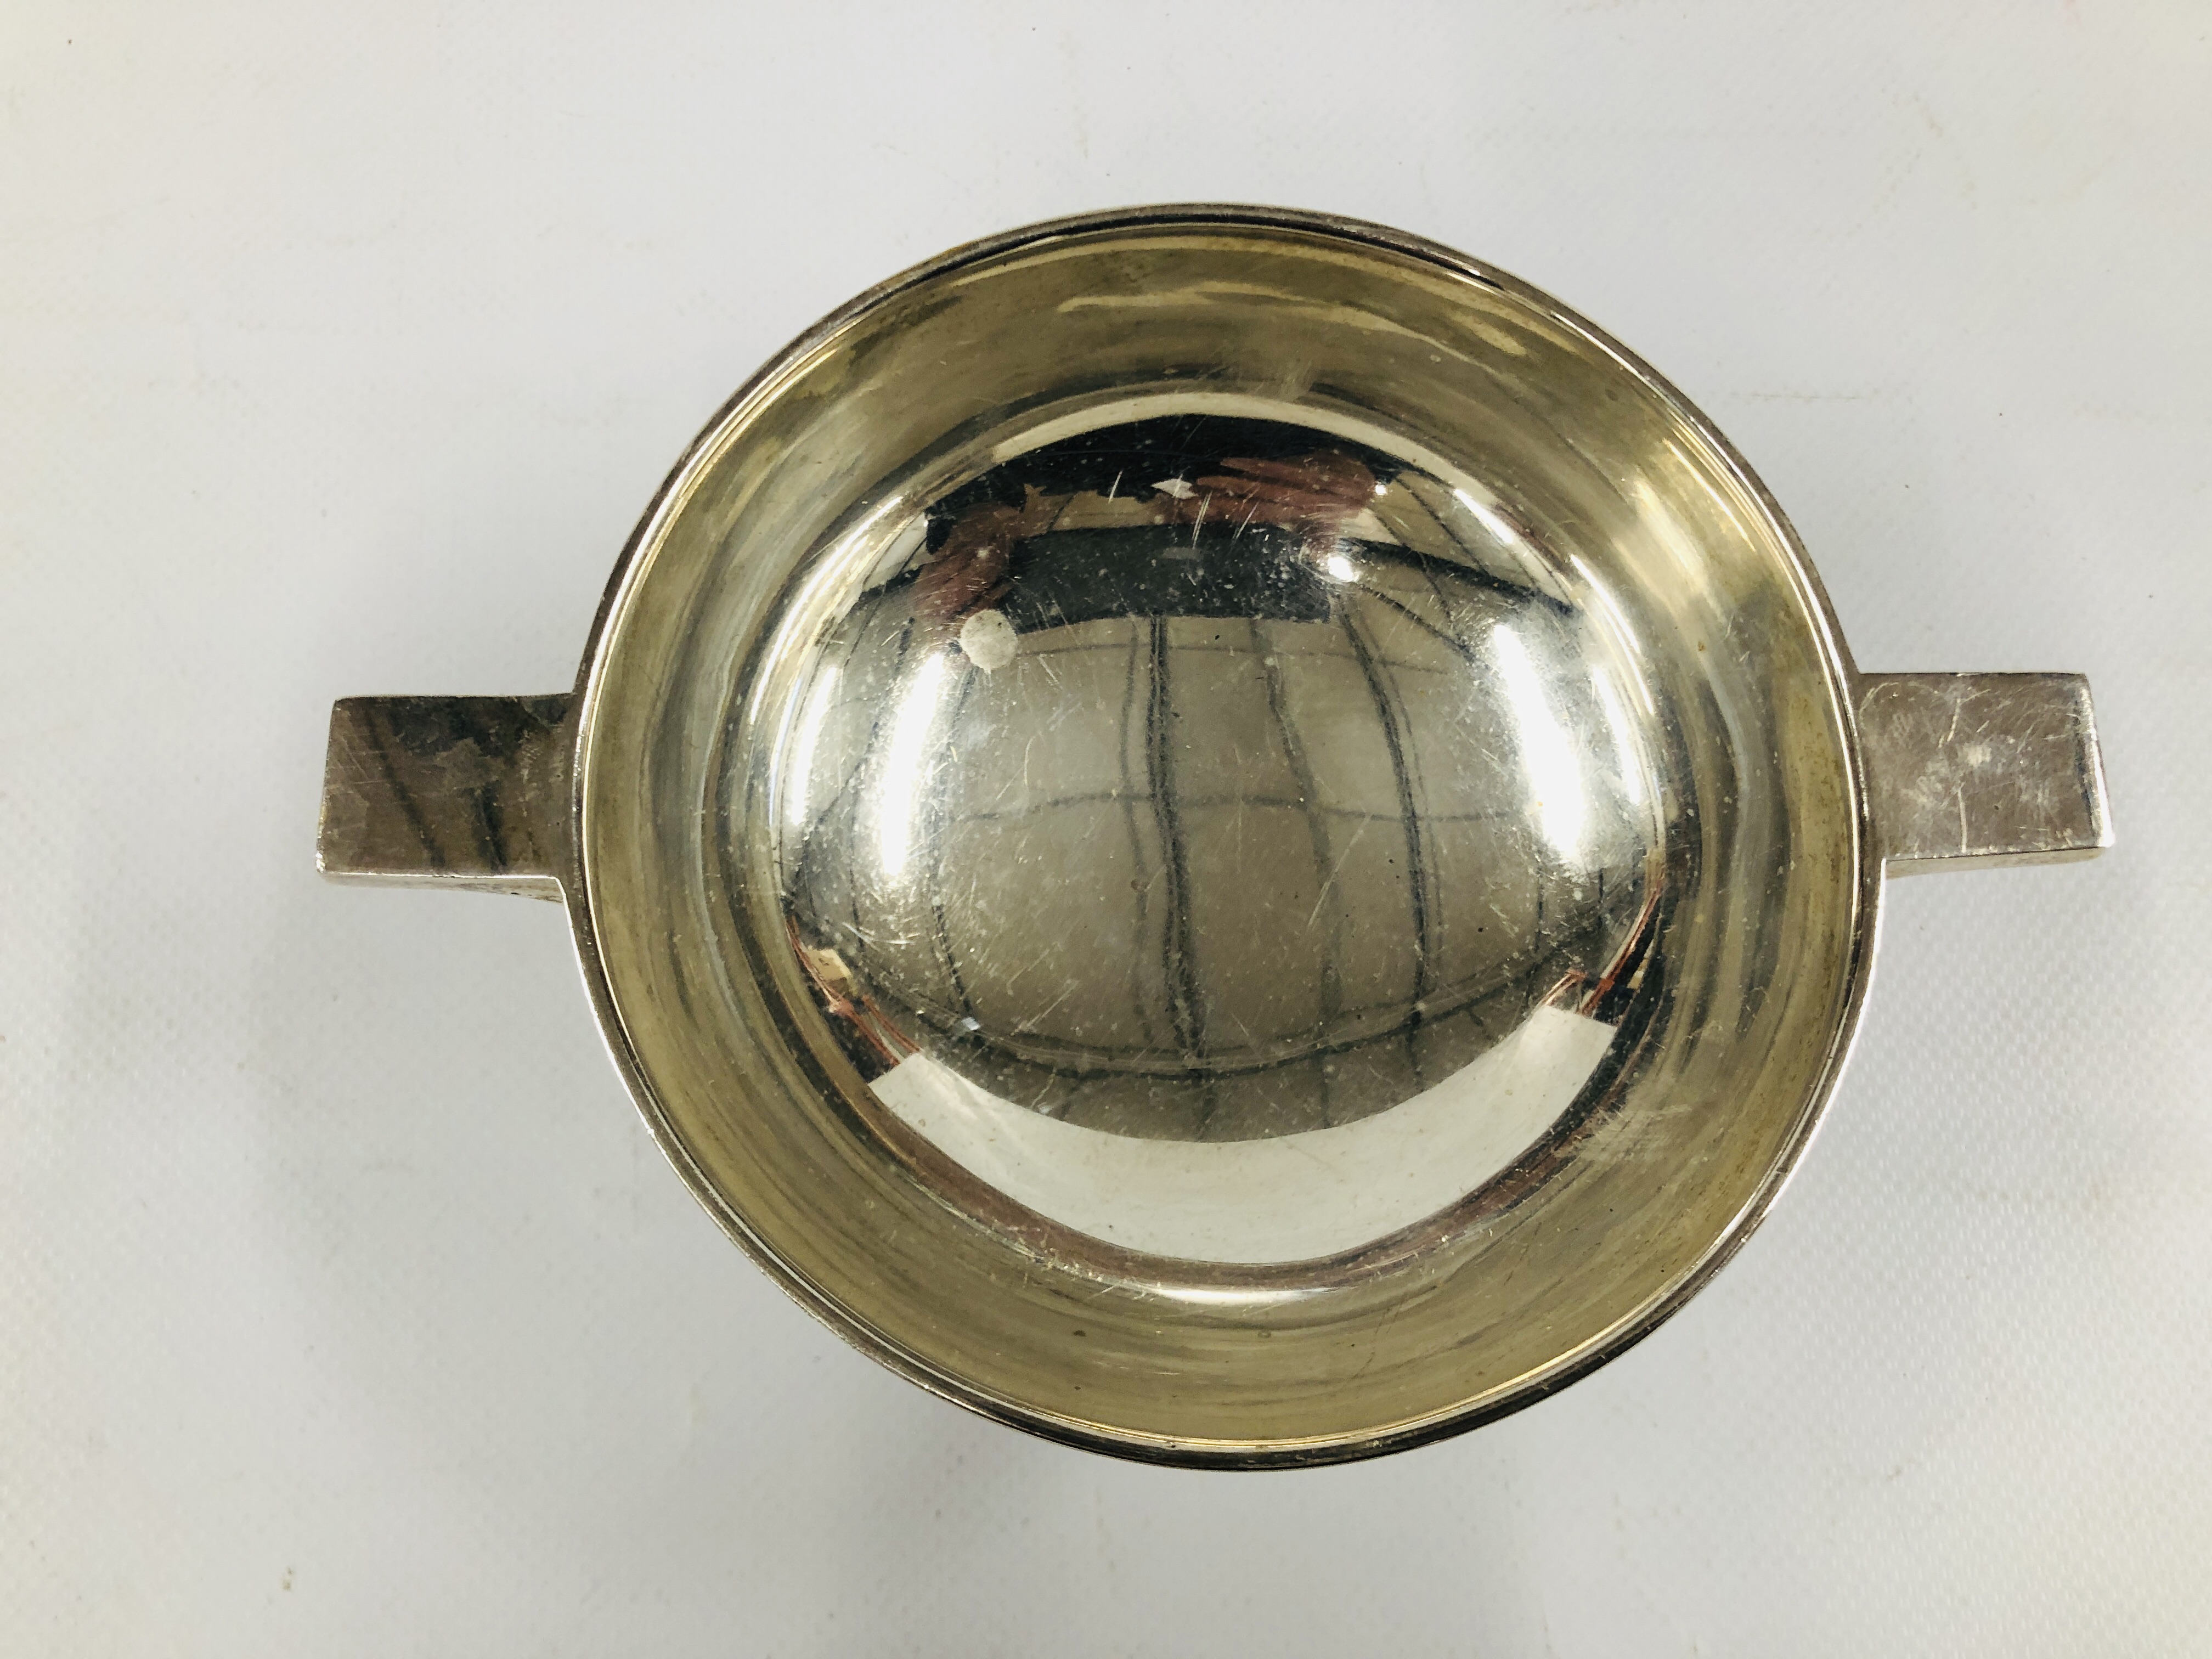 A SILVER FOOTED TWO HANDLED BOWL - BOWL DIAMETER 11.5CM. - Image 4 of 8